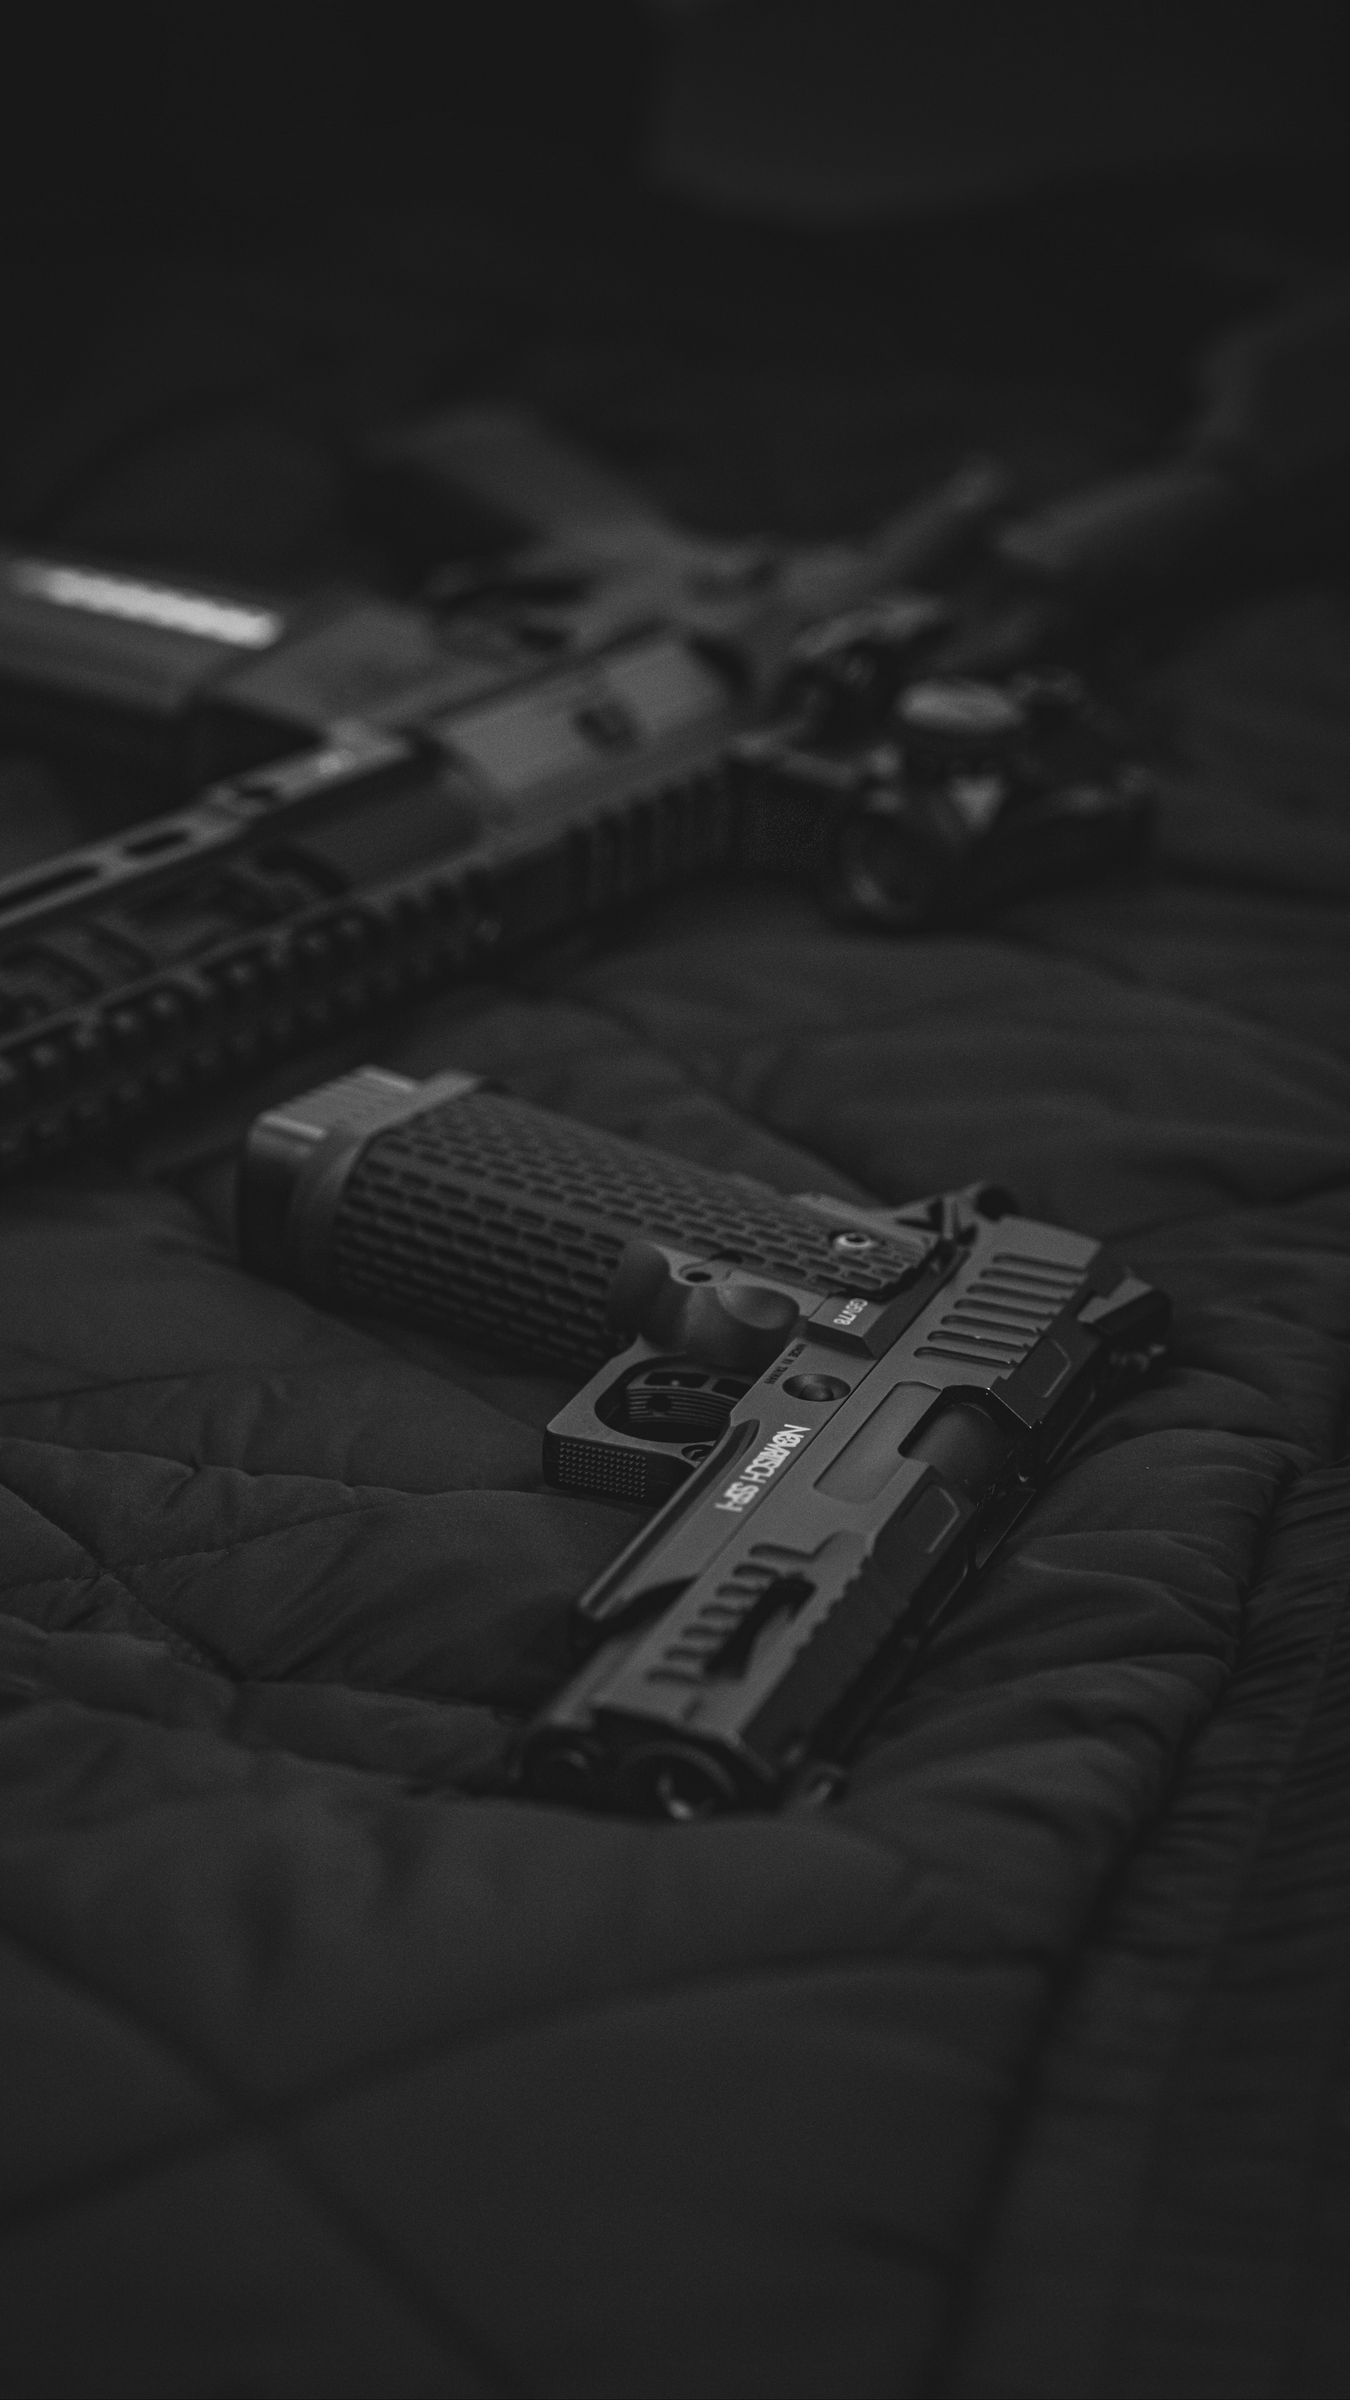 Rifle Photos Download The BEST Free Rifle Stock Photos  HD Images